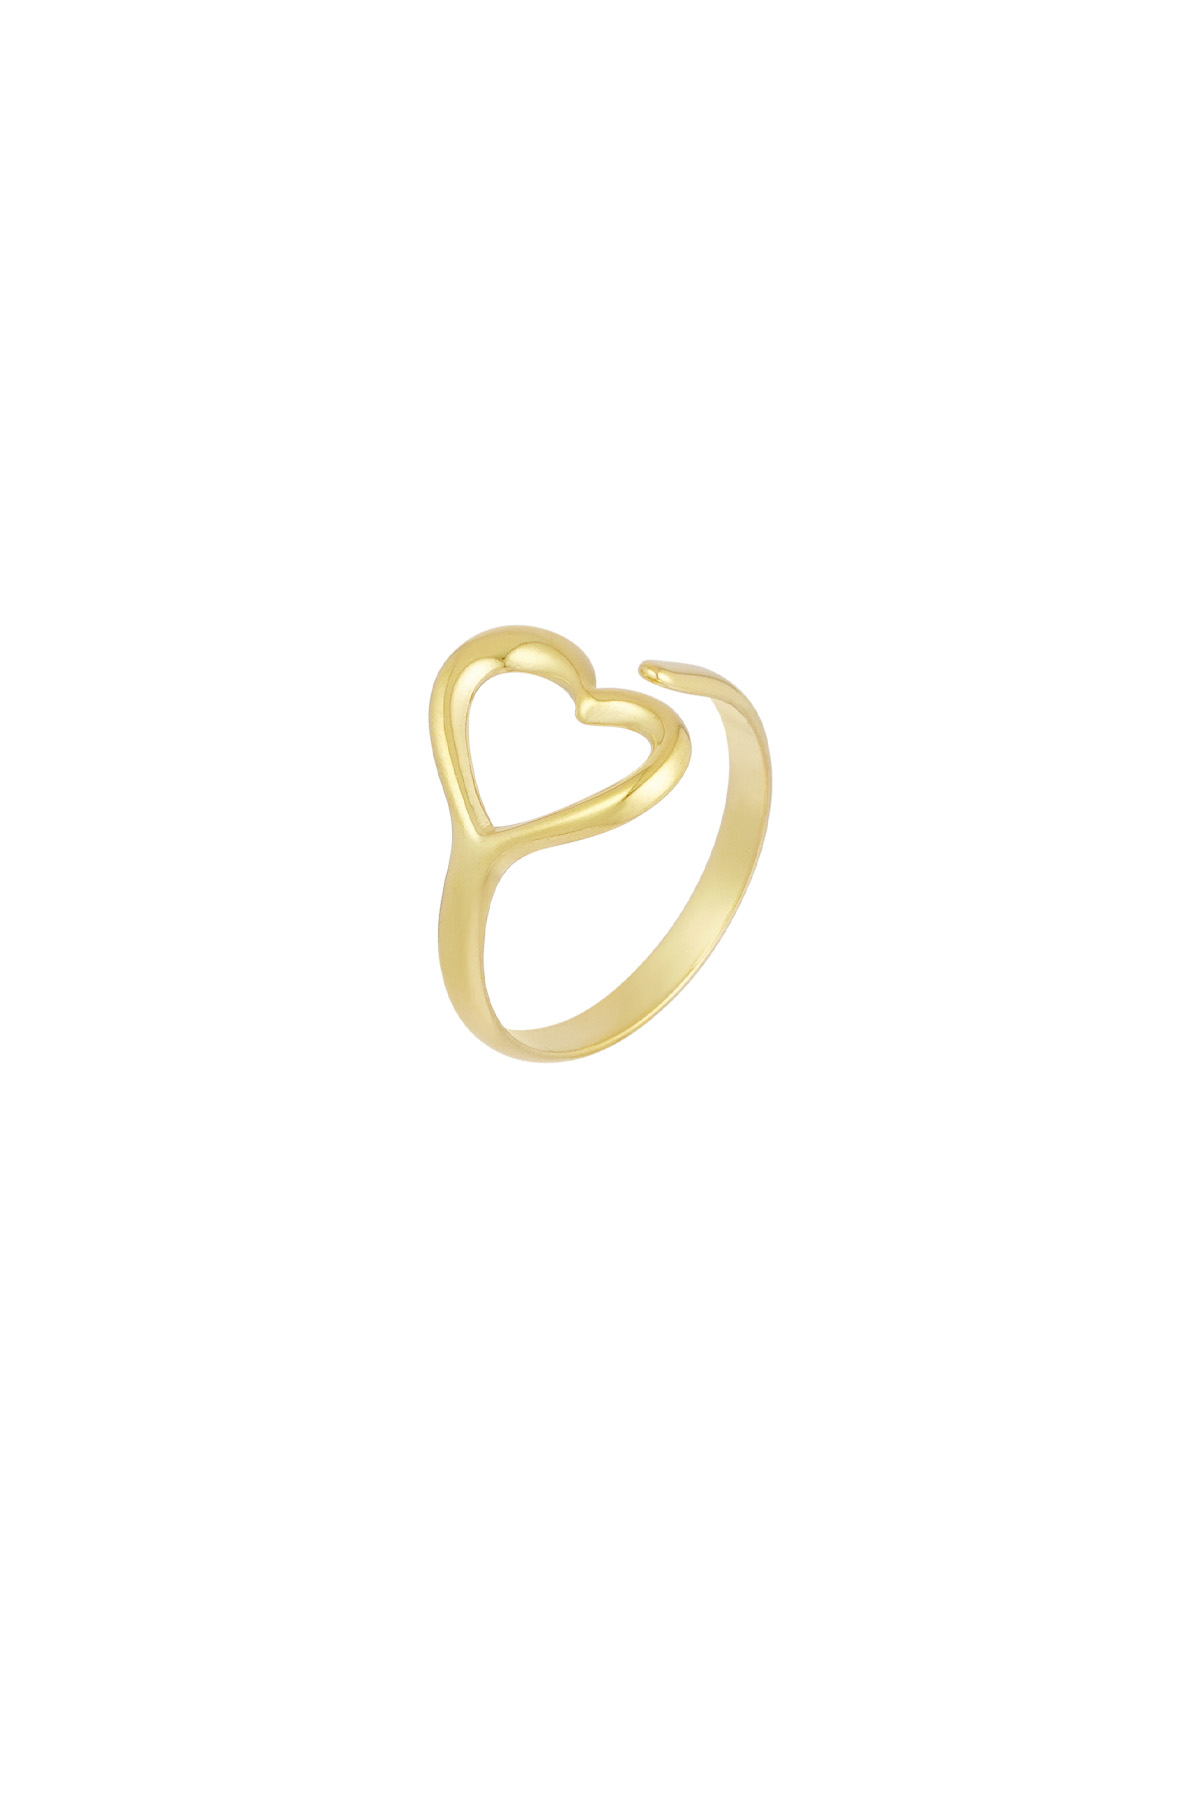 Ring love upside down - gold h5 Picture3